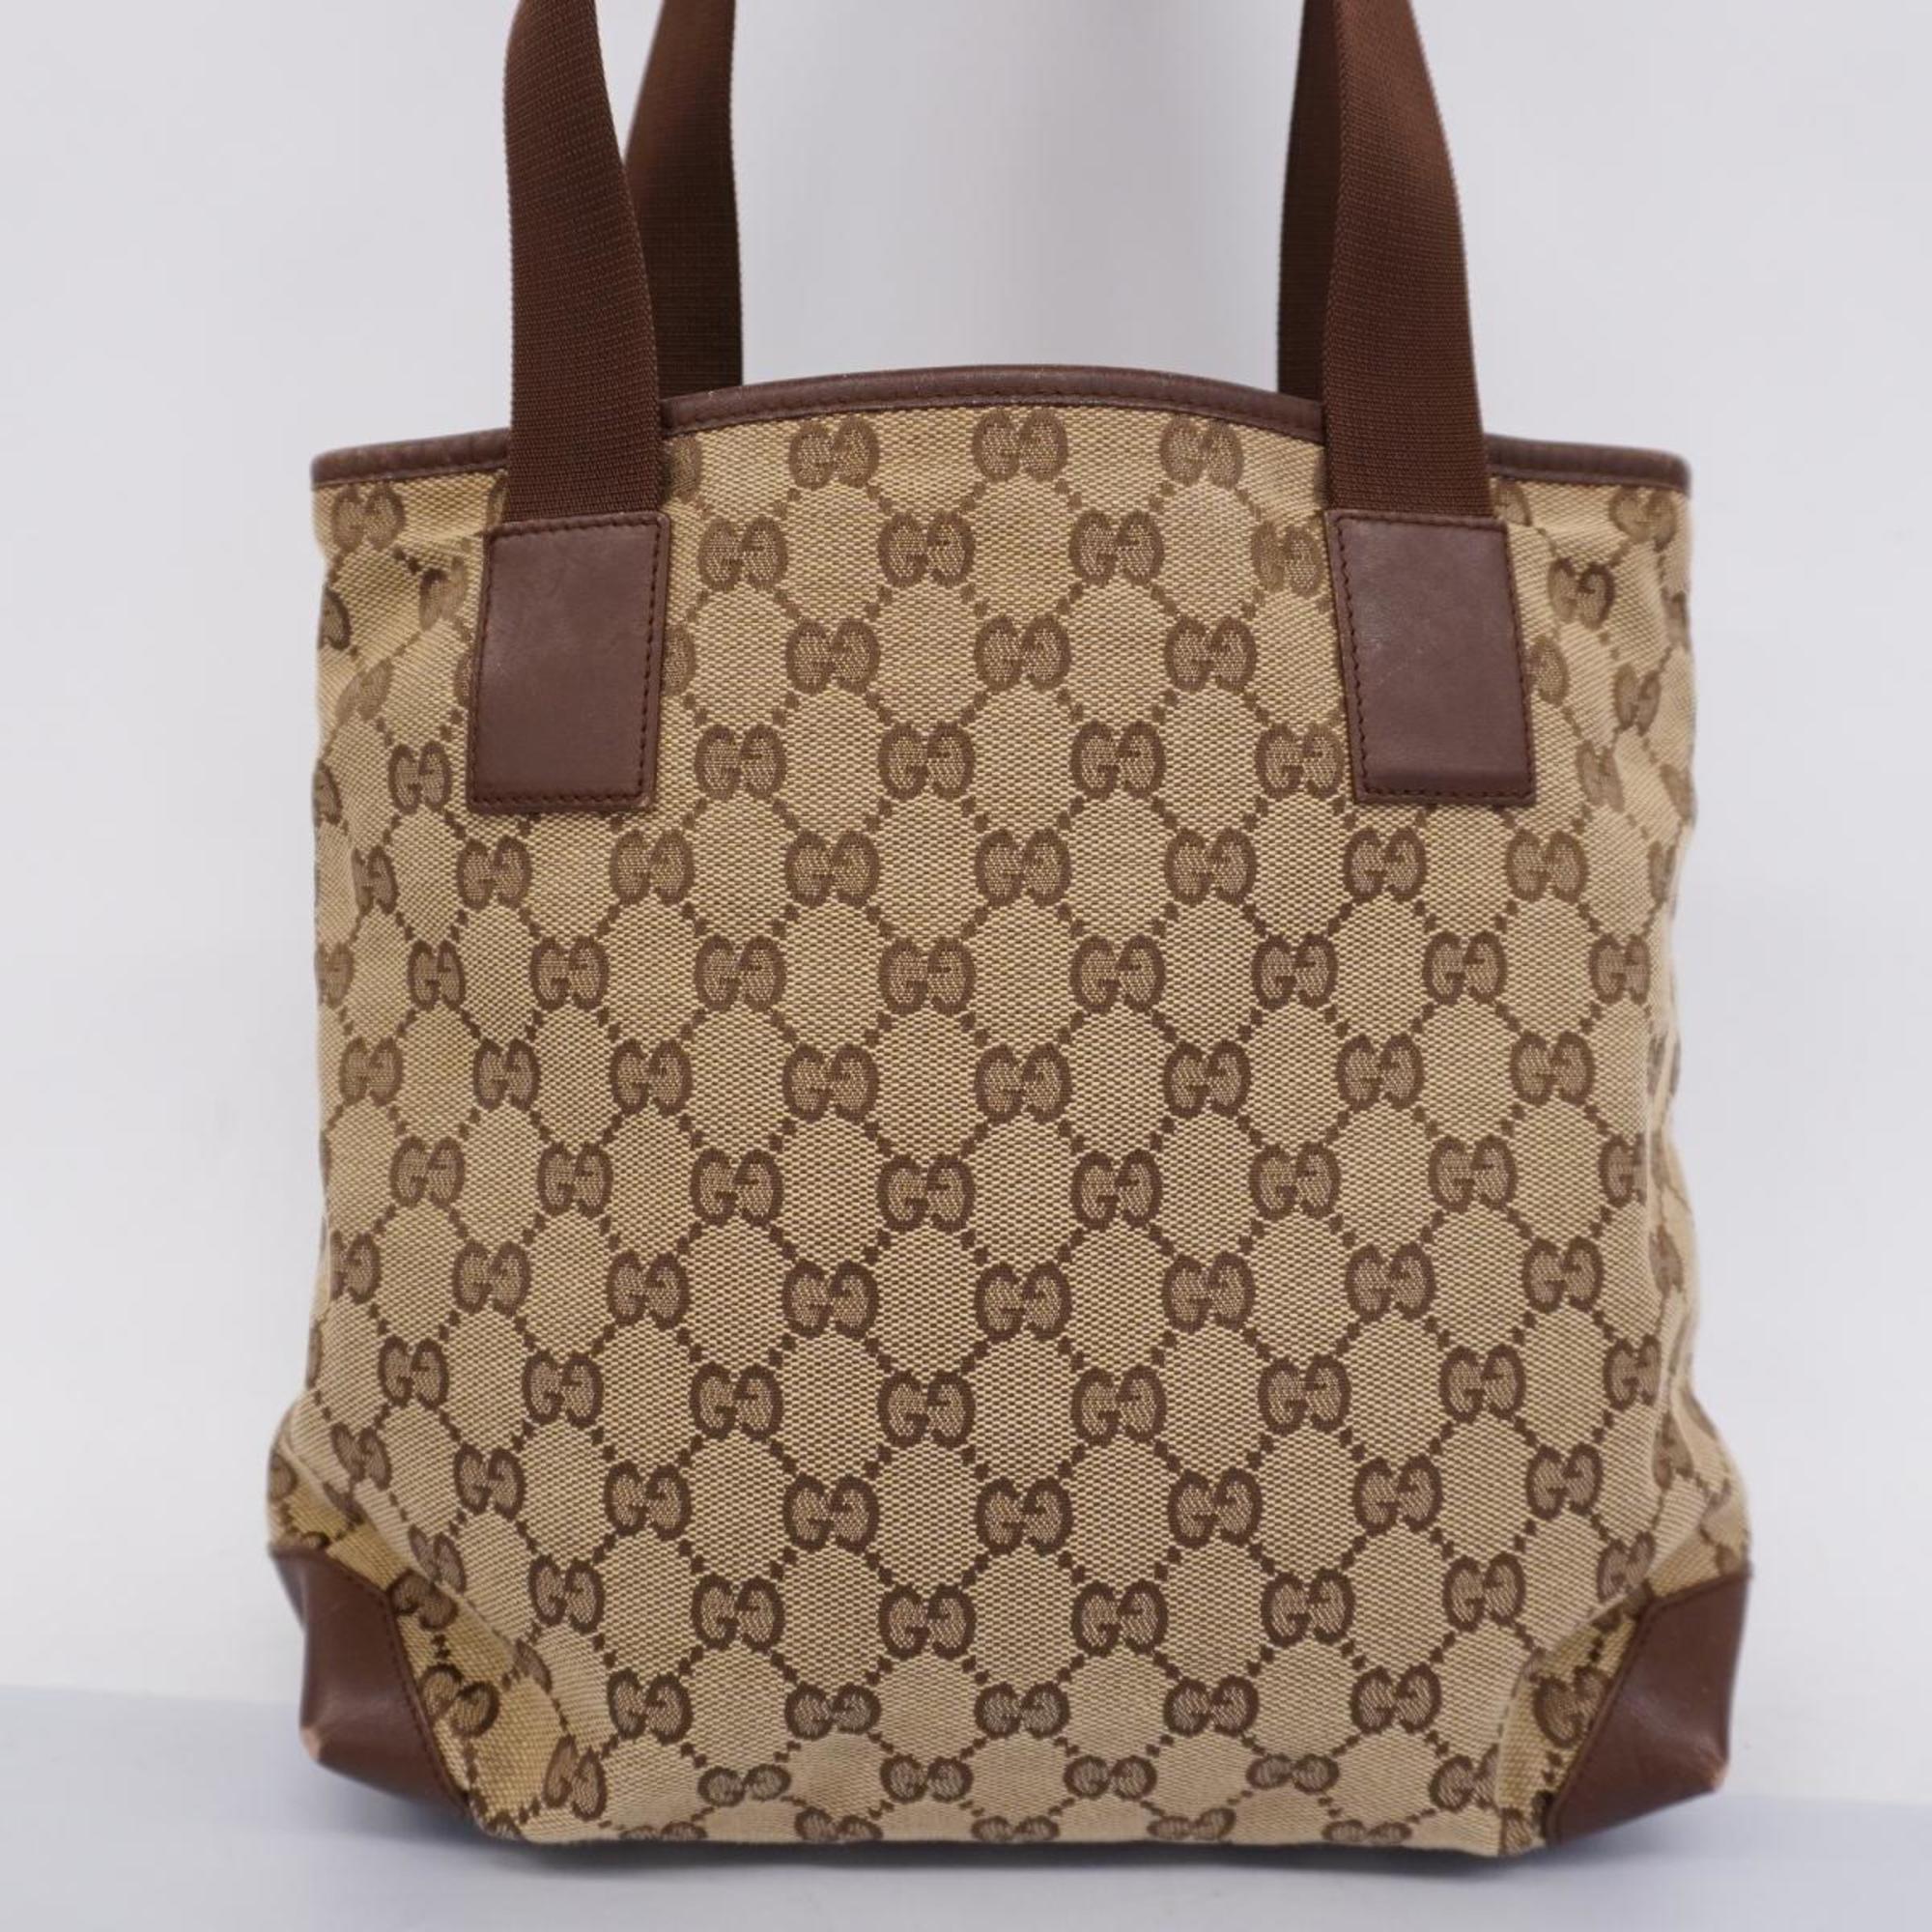 Gucci Tote Bag GG Canvas 019 0402 Leather Brown Women's